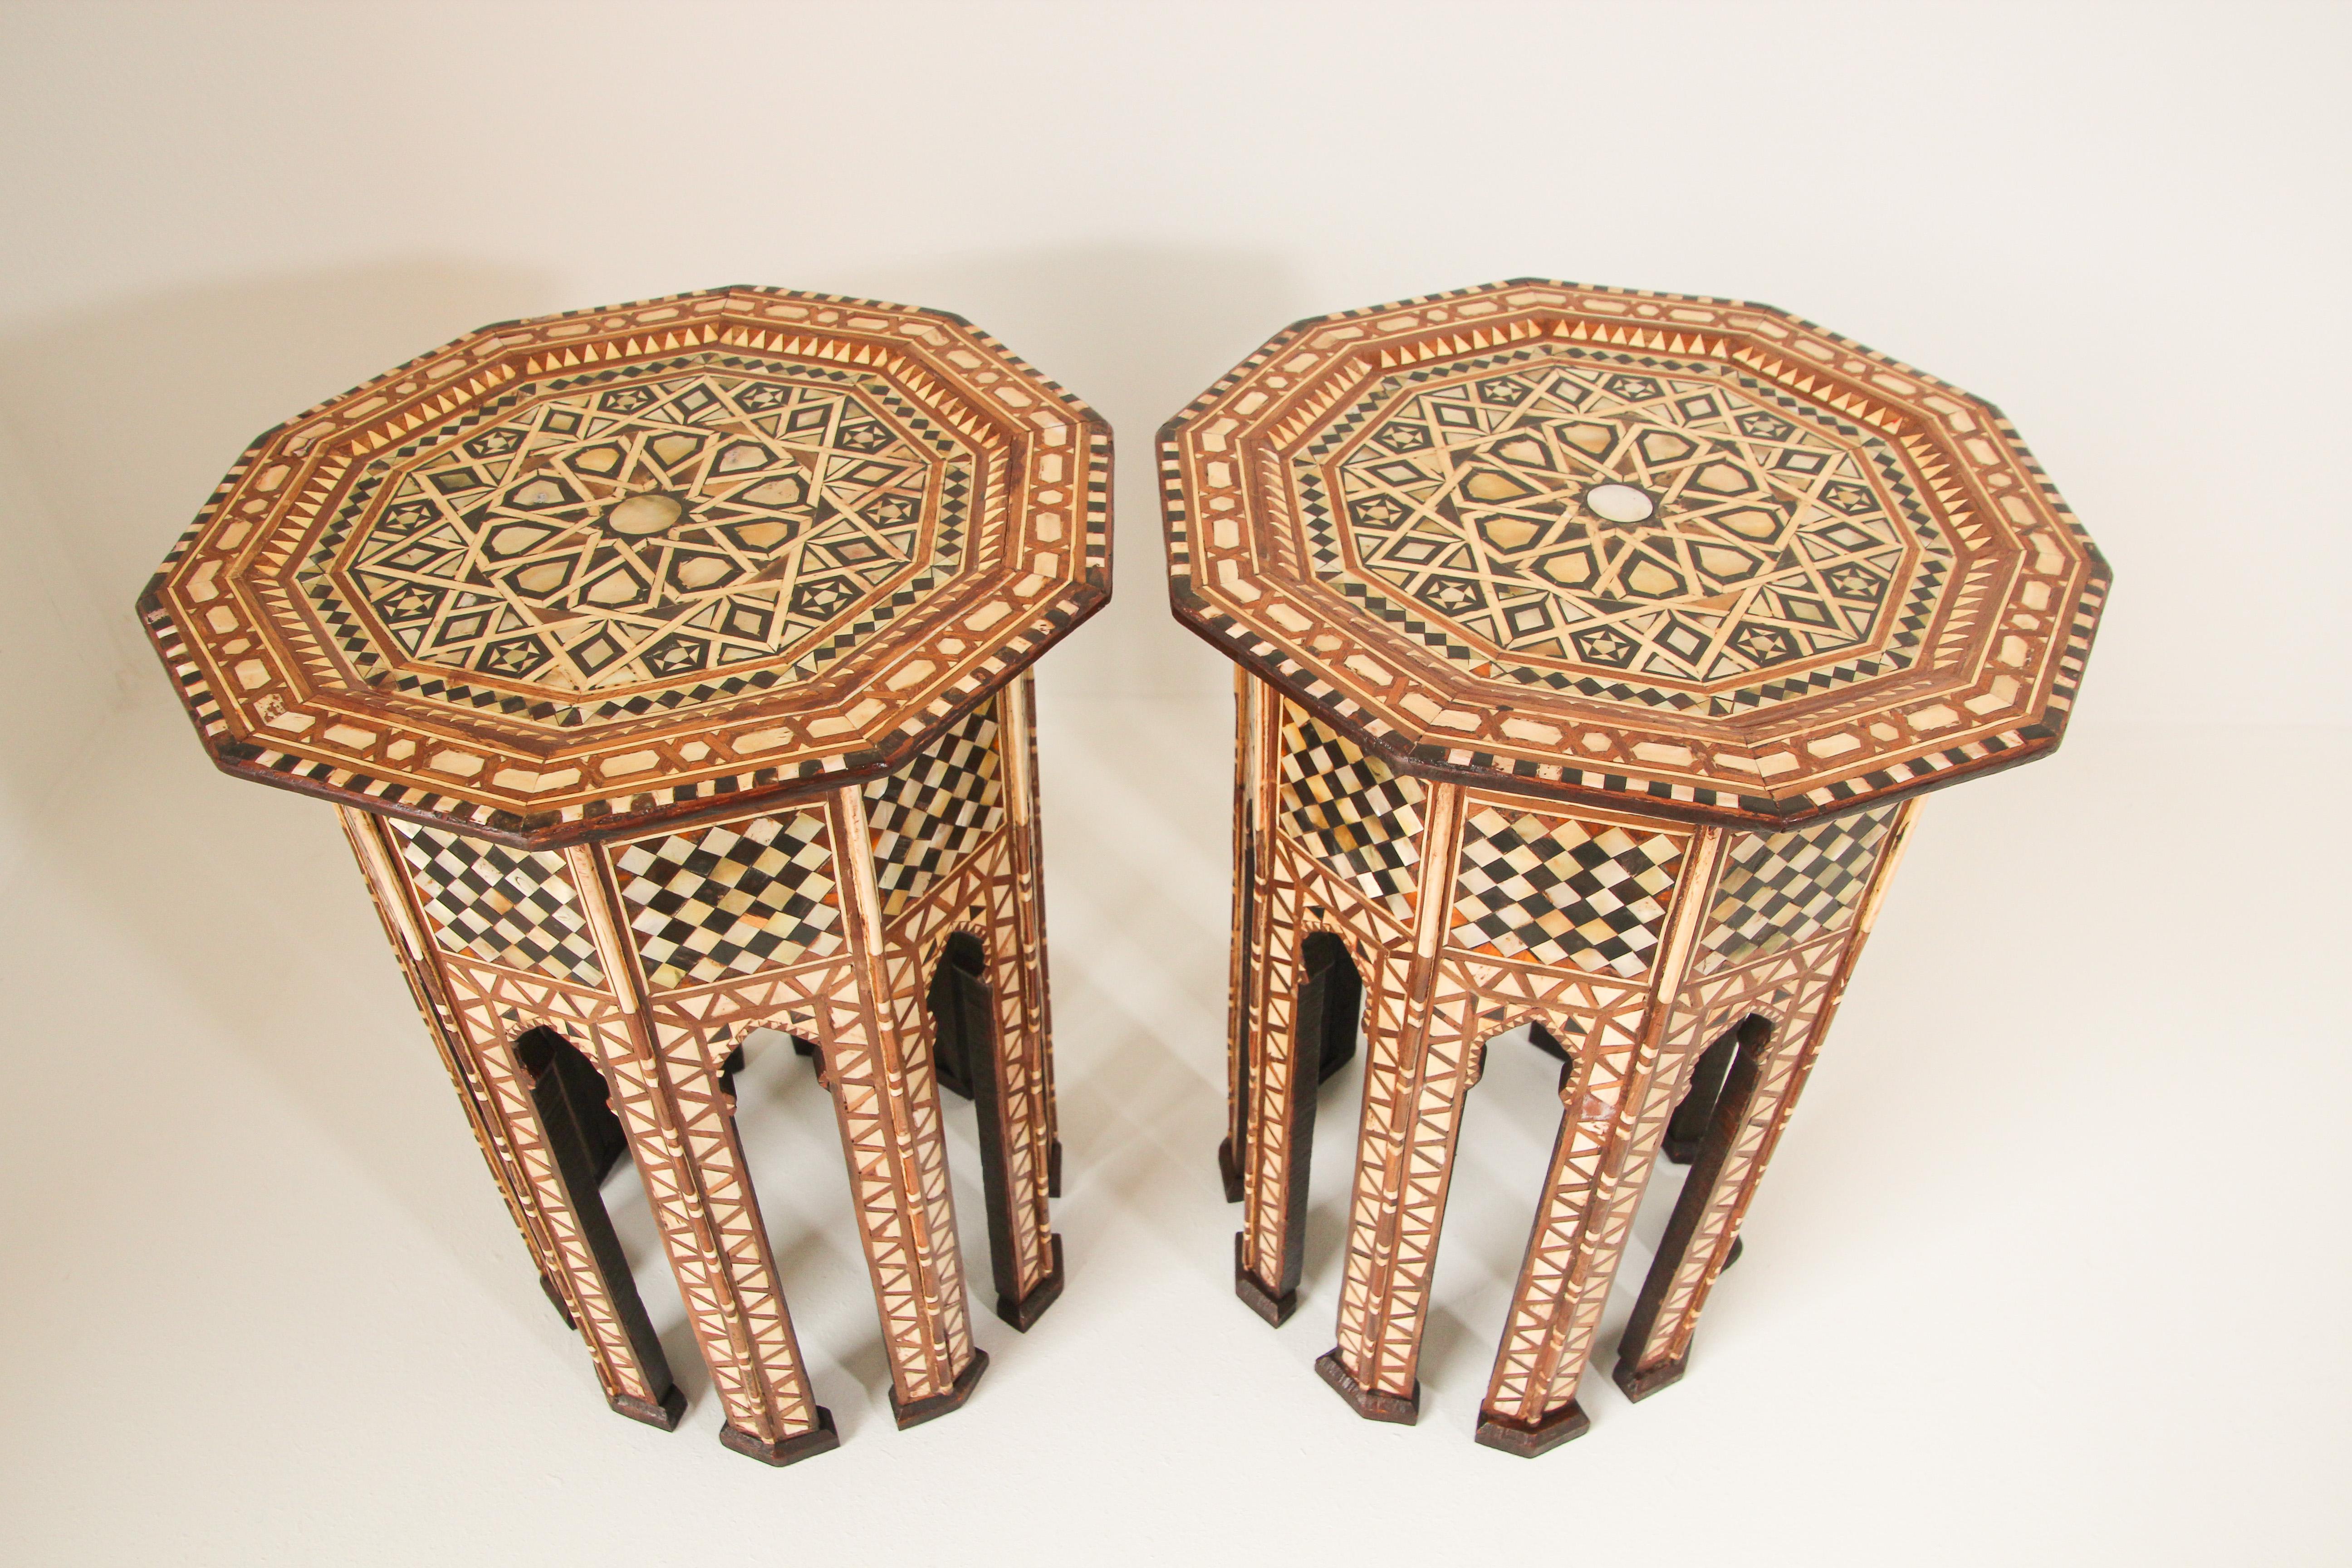 Fruitwood Middle East Syrian Octagonal Tables Inlaid